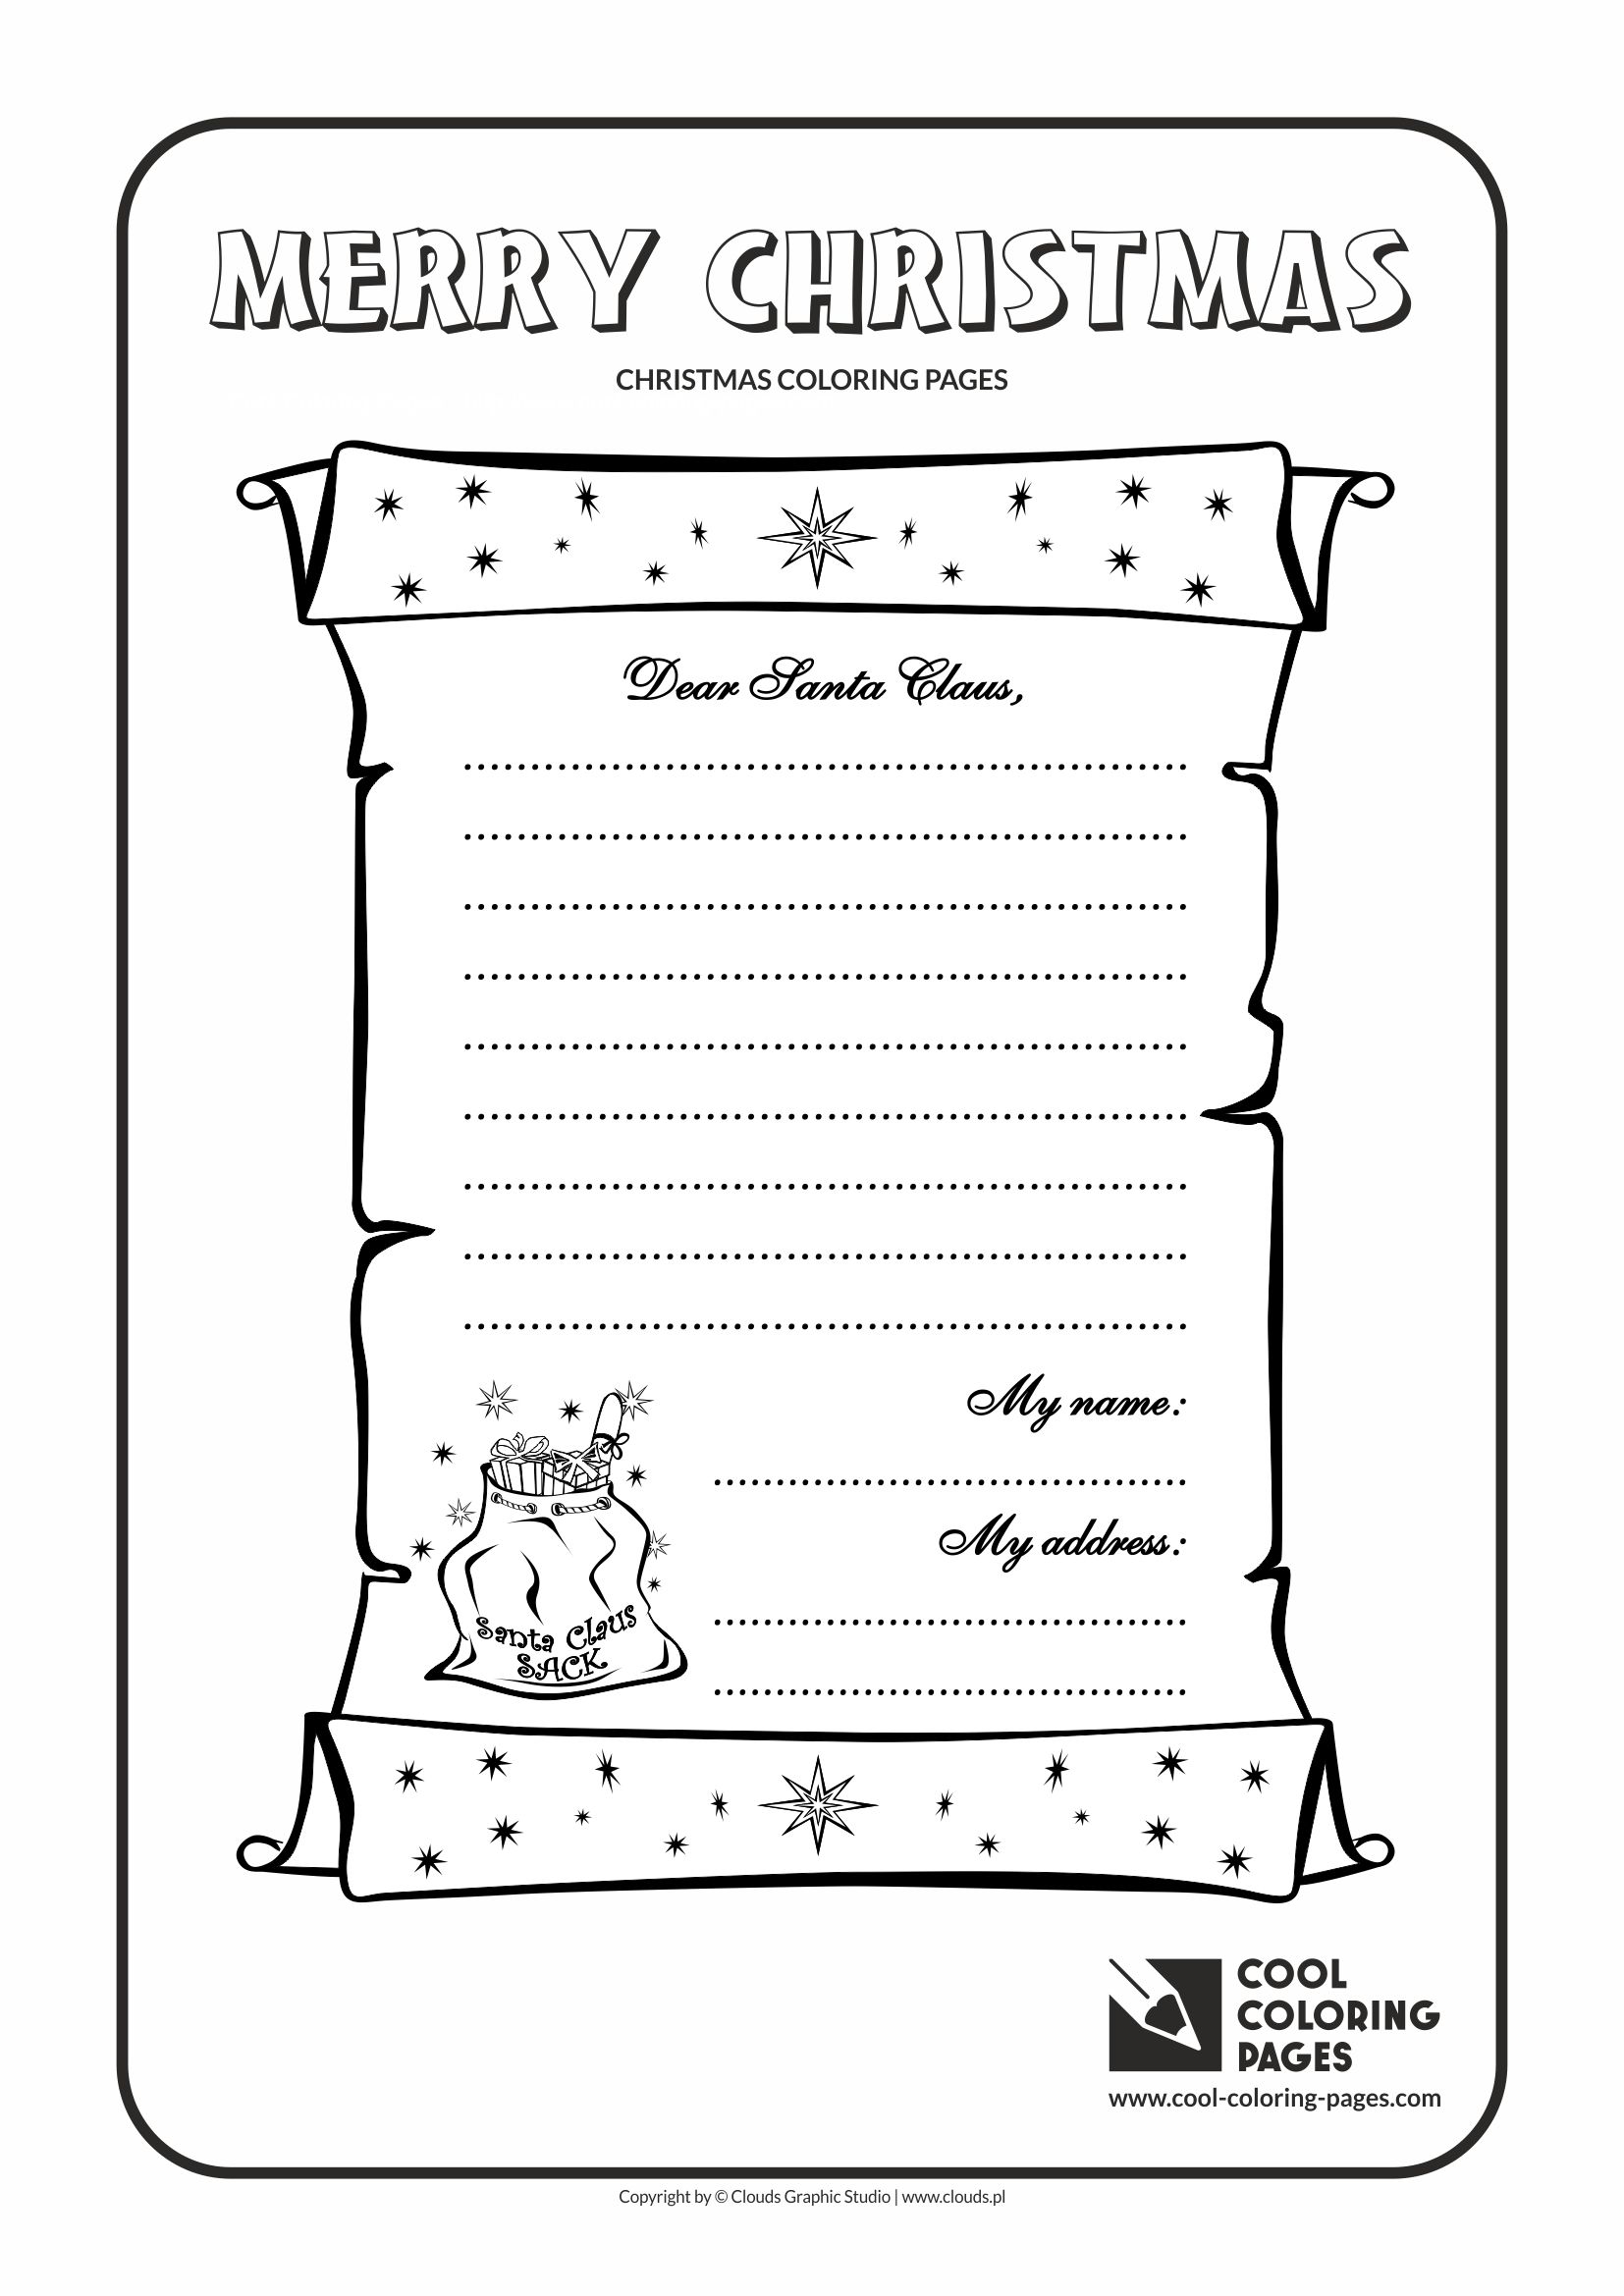 cool-coloring-pages-letter-to-santa-claus-no-1-coloring-page-cool